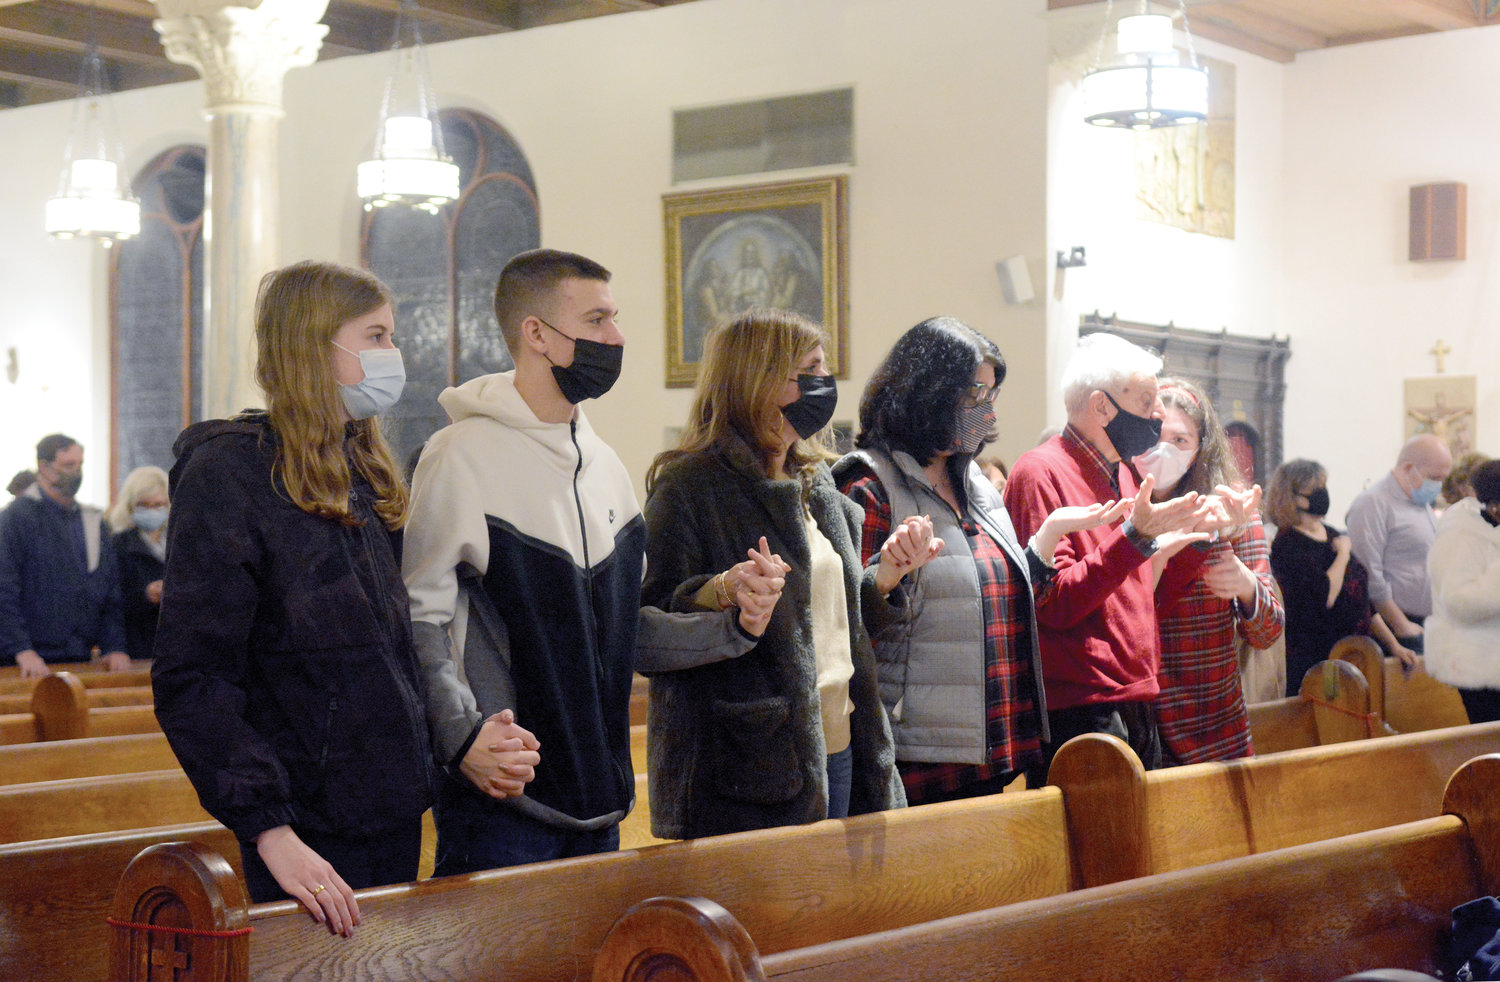 The faithful pray in the pews.